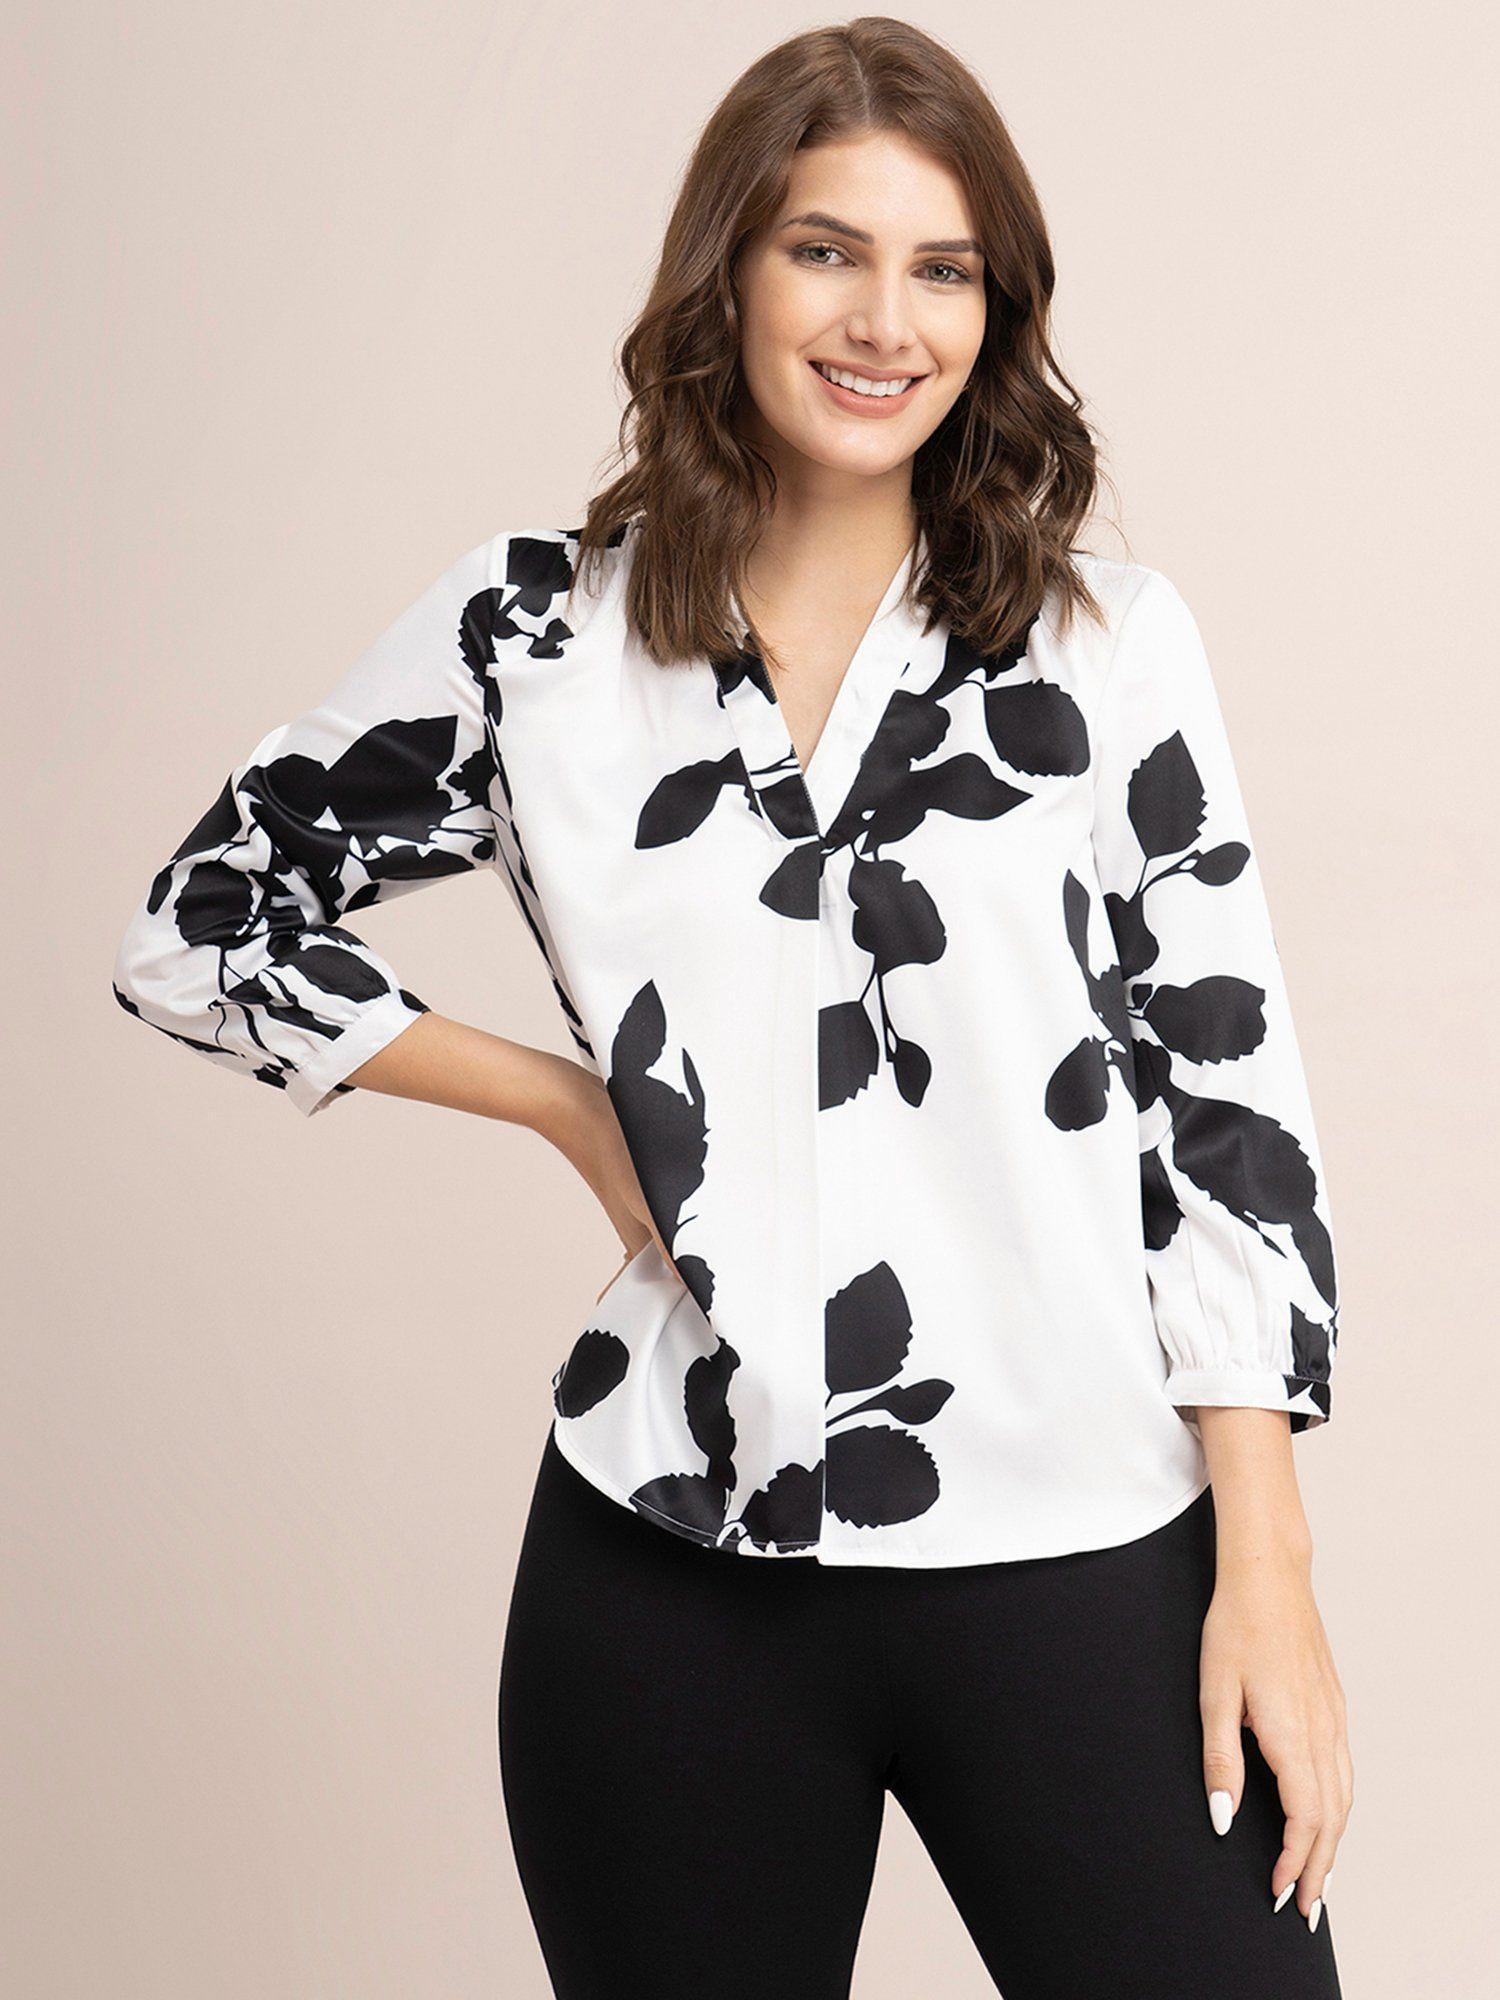 satin floral print top - white and black